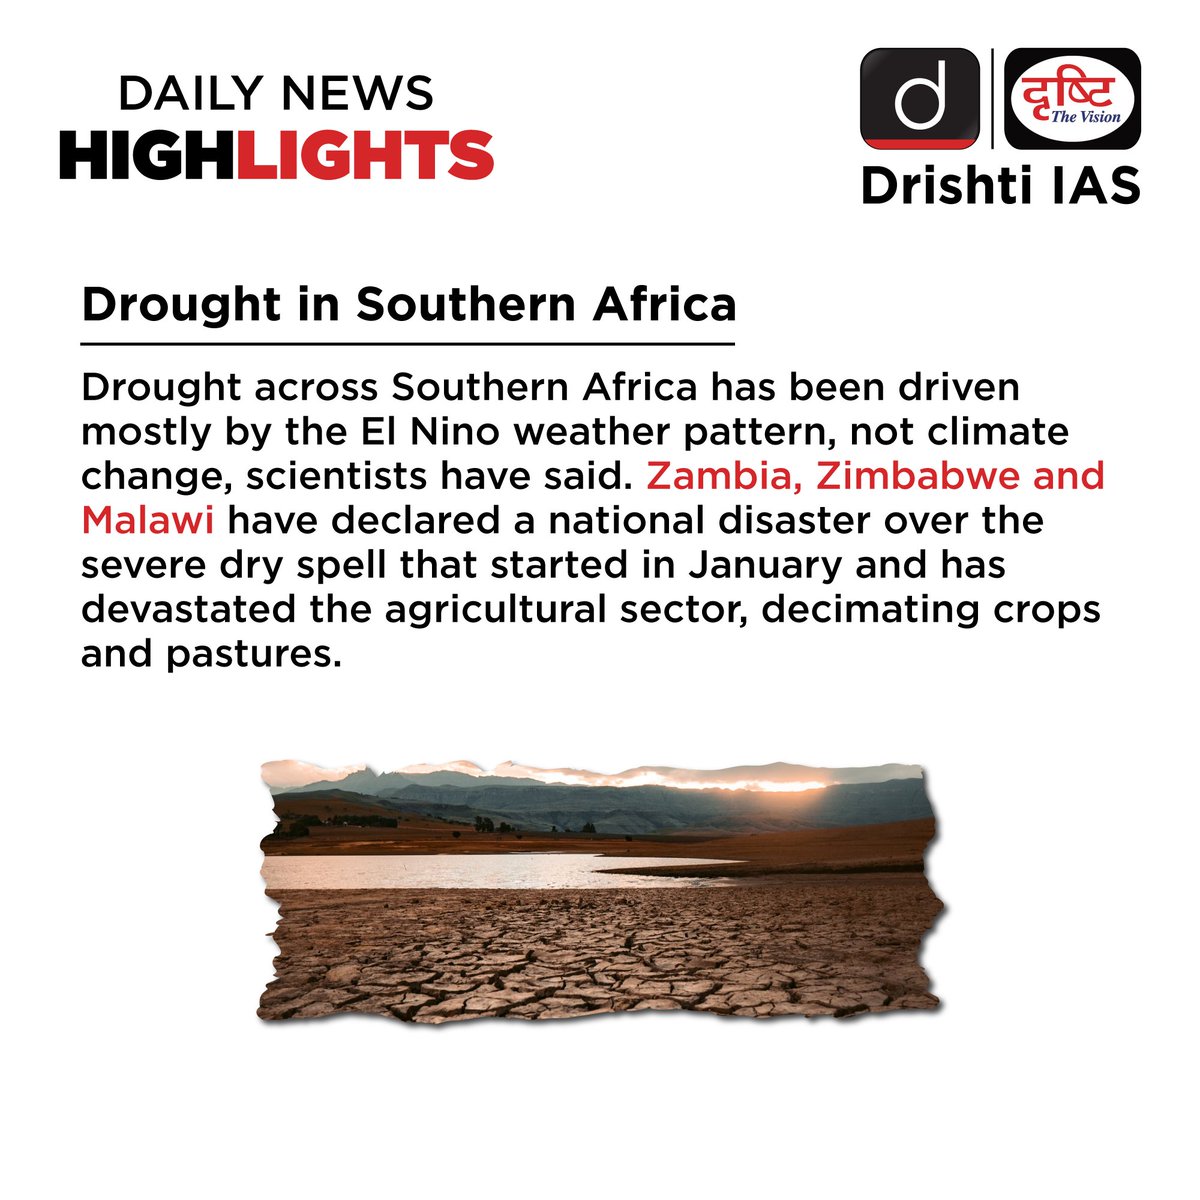 Your daily dose of current affairs for #UPSC2024 Prelims with #DrishtiDailyNewsHighlights. 

#PrelimsSuccessWithDrishtiIAS #PrelimsWithDrishtiIAS #Prelims2024 #Cyclone #Hidaya #SouthAfrica #India #UPI #Ghana #Zambia #UPSC #GeneralStudies #DrishtiIAS #DrishtiIASEnglish